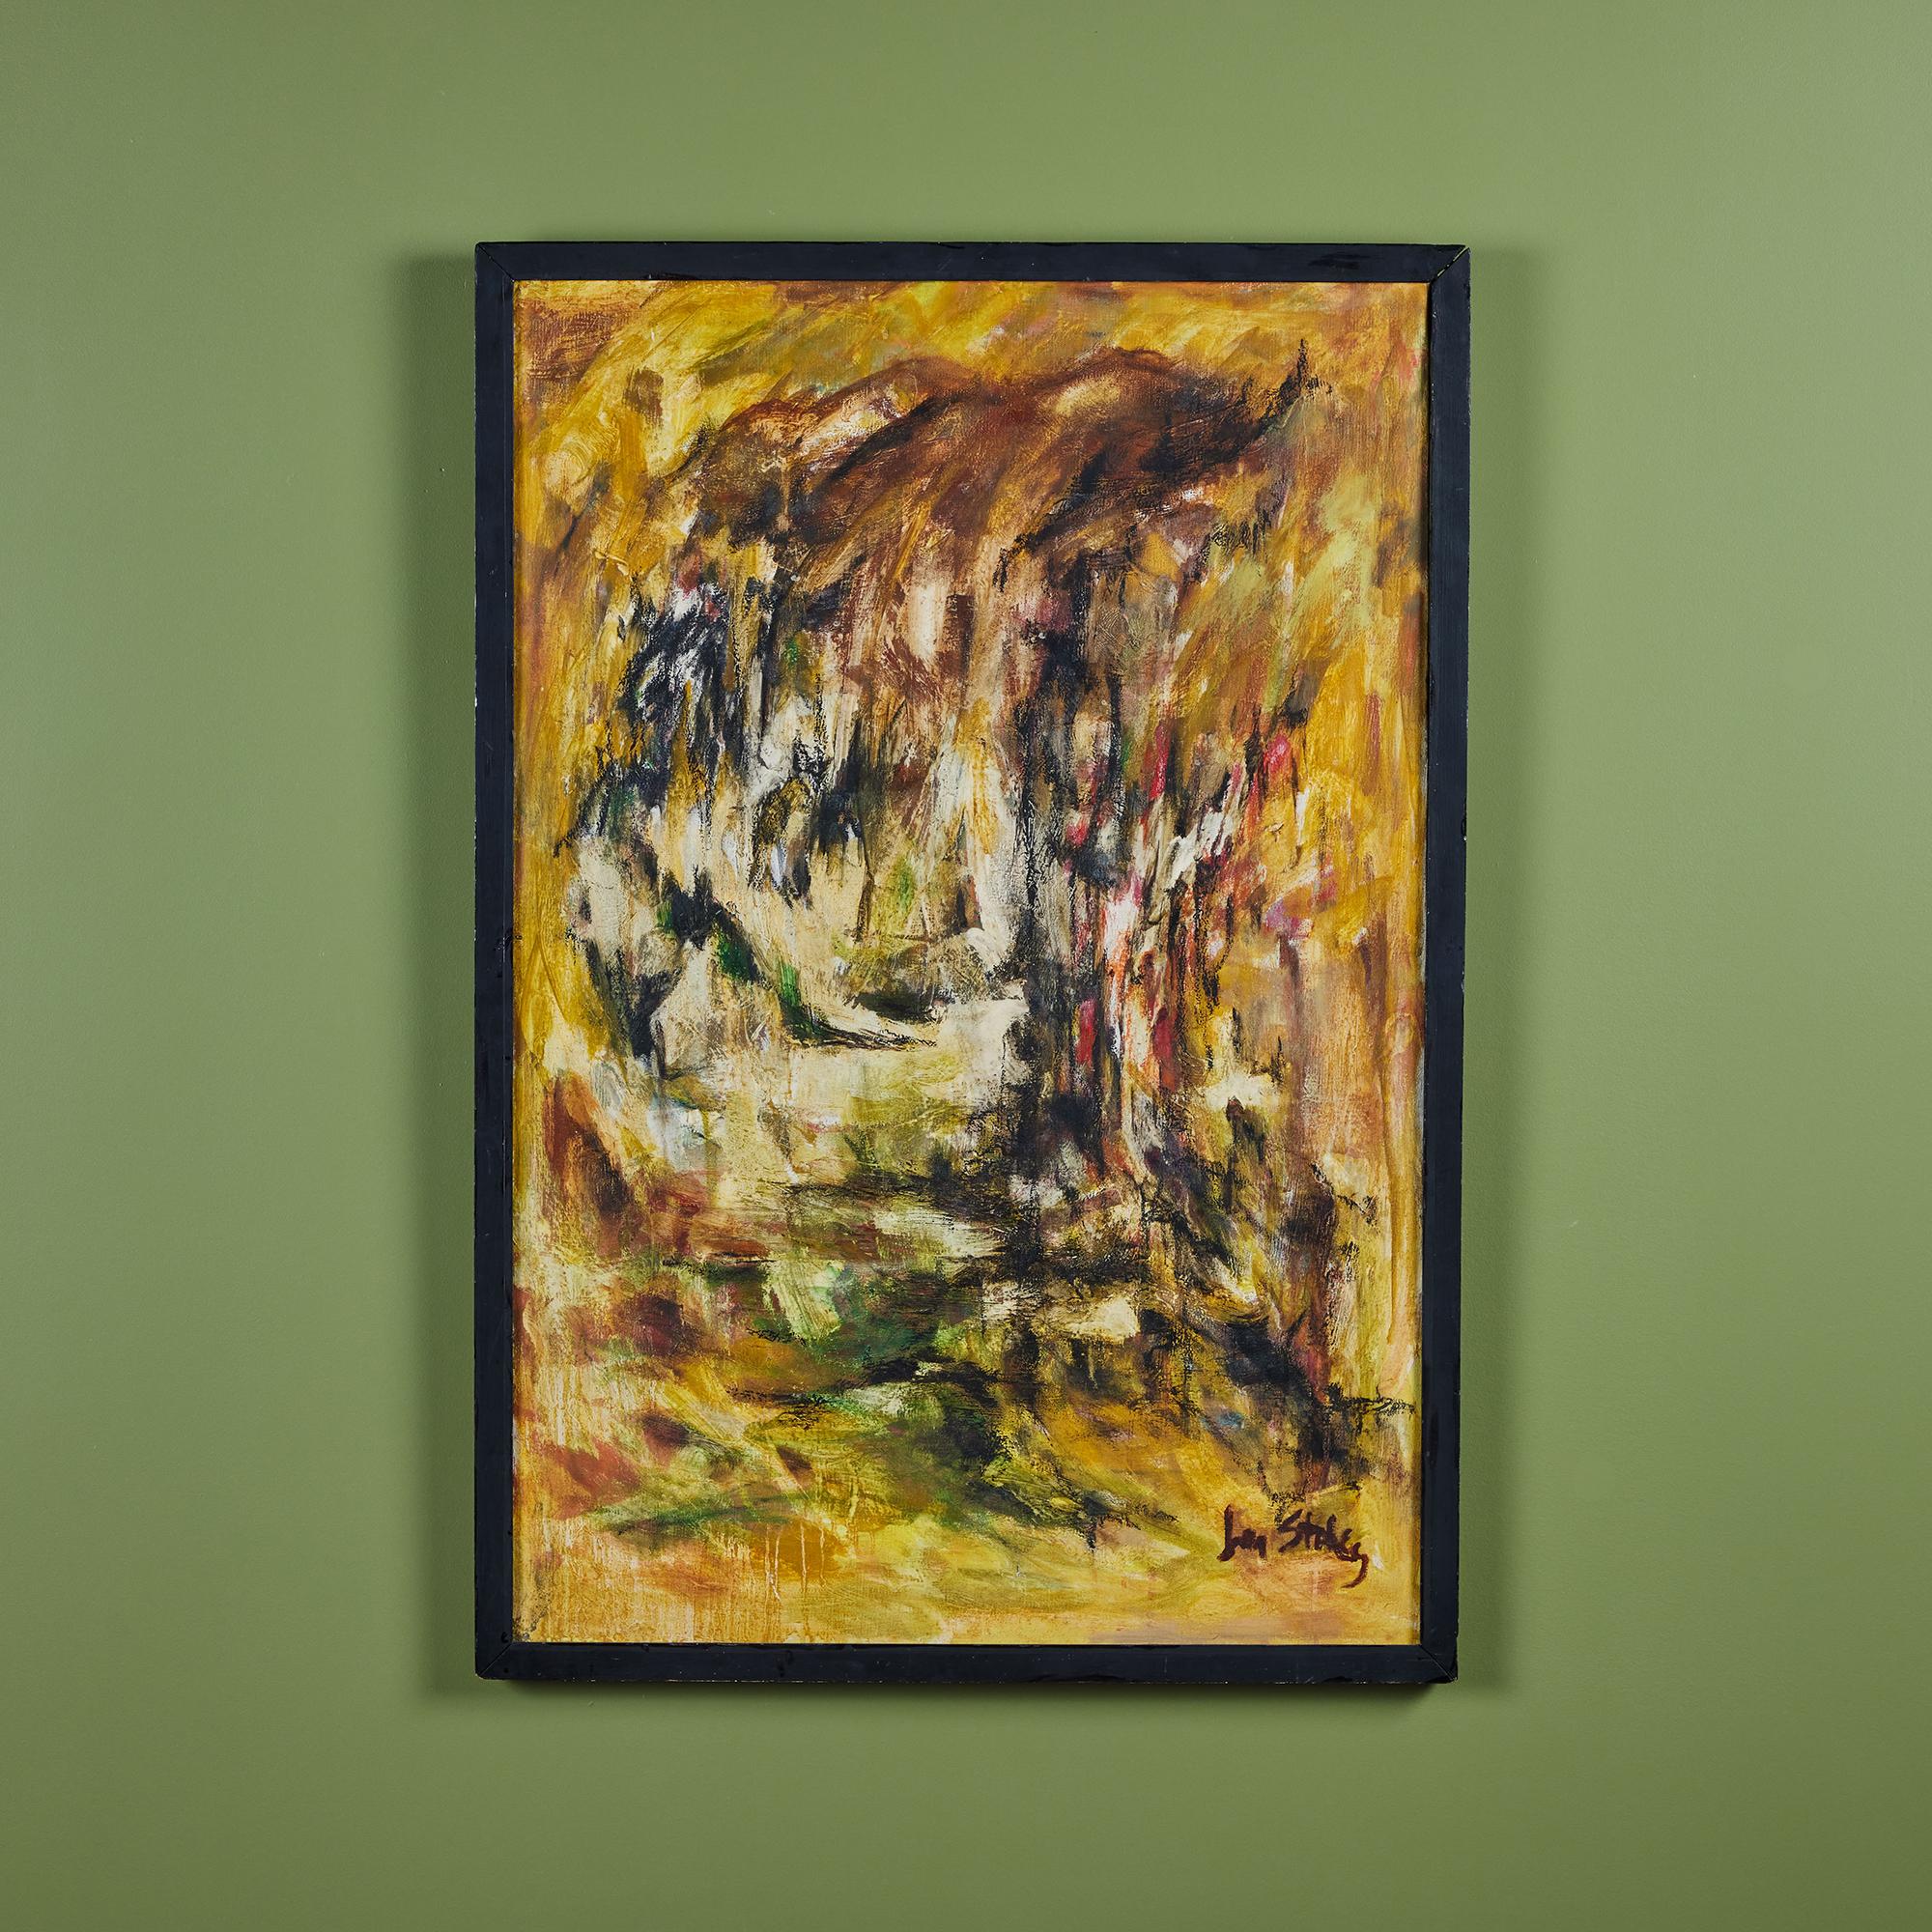 Framed acrylic abstract painting on canvas by artist, Jon Staley featuring a range of earth tones.  Signed by the artist.

Dimensions
25.75